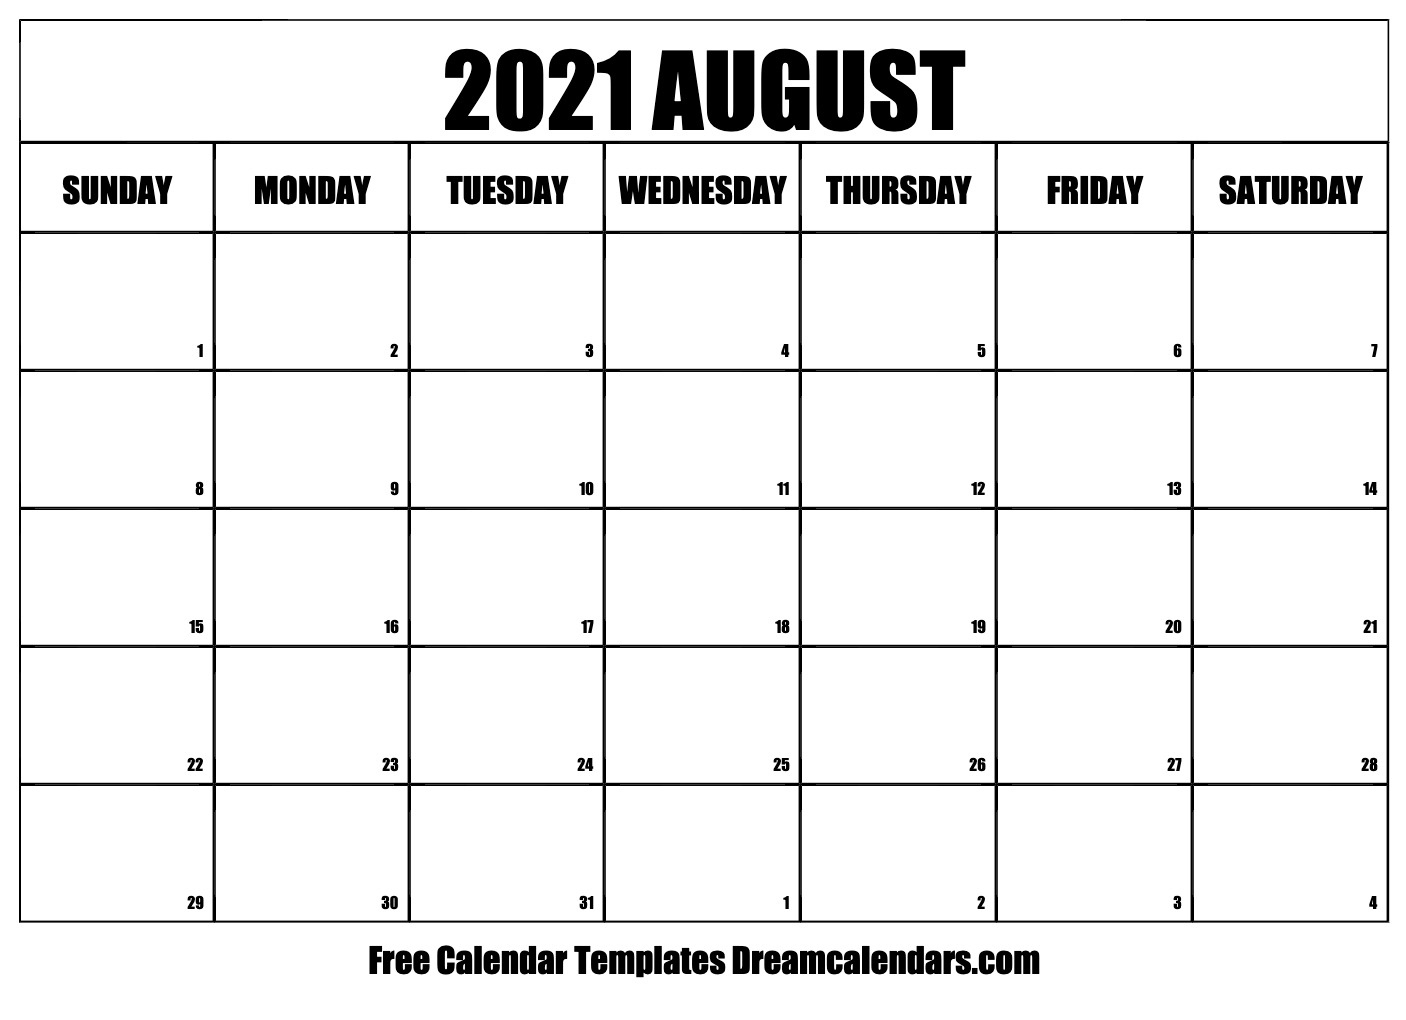 August 2021 Calendar | Free Blank Printable Templates Calendar From August 2020 To June 2021